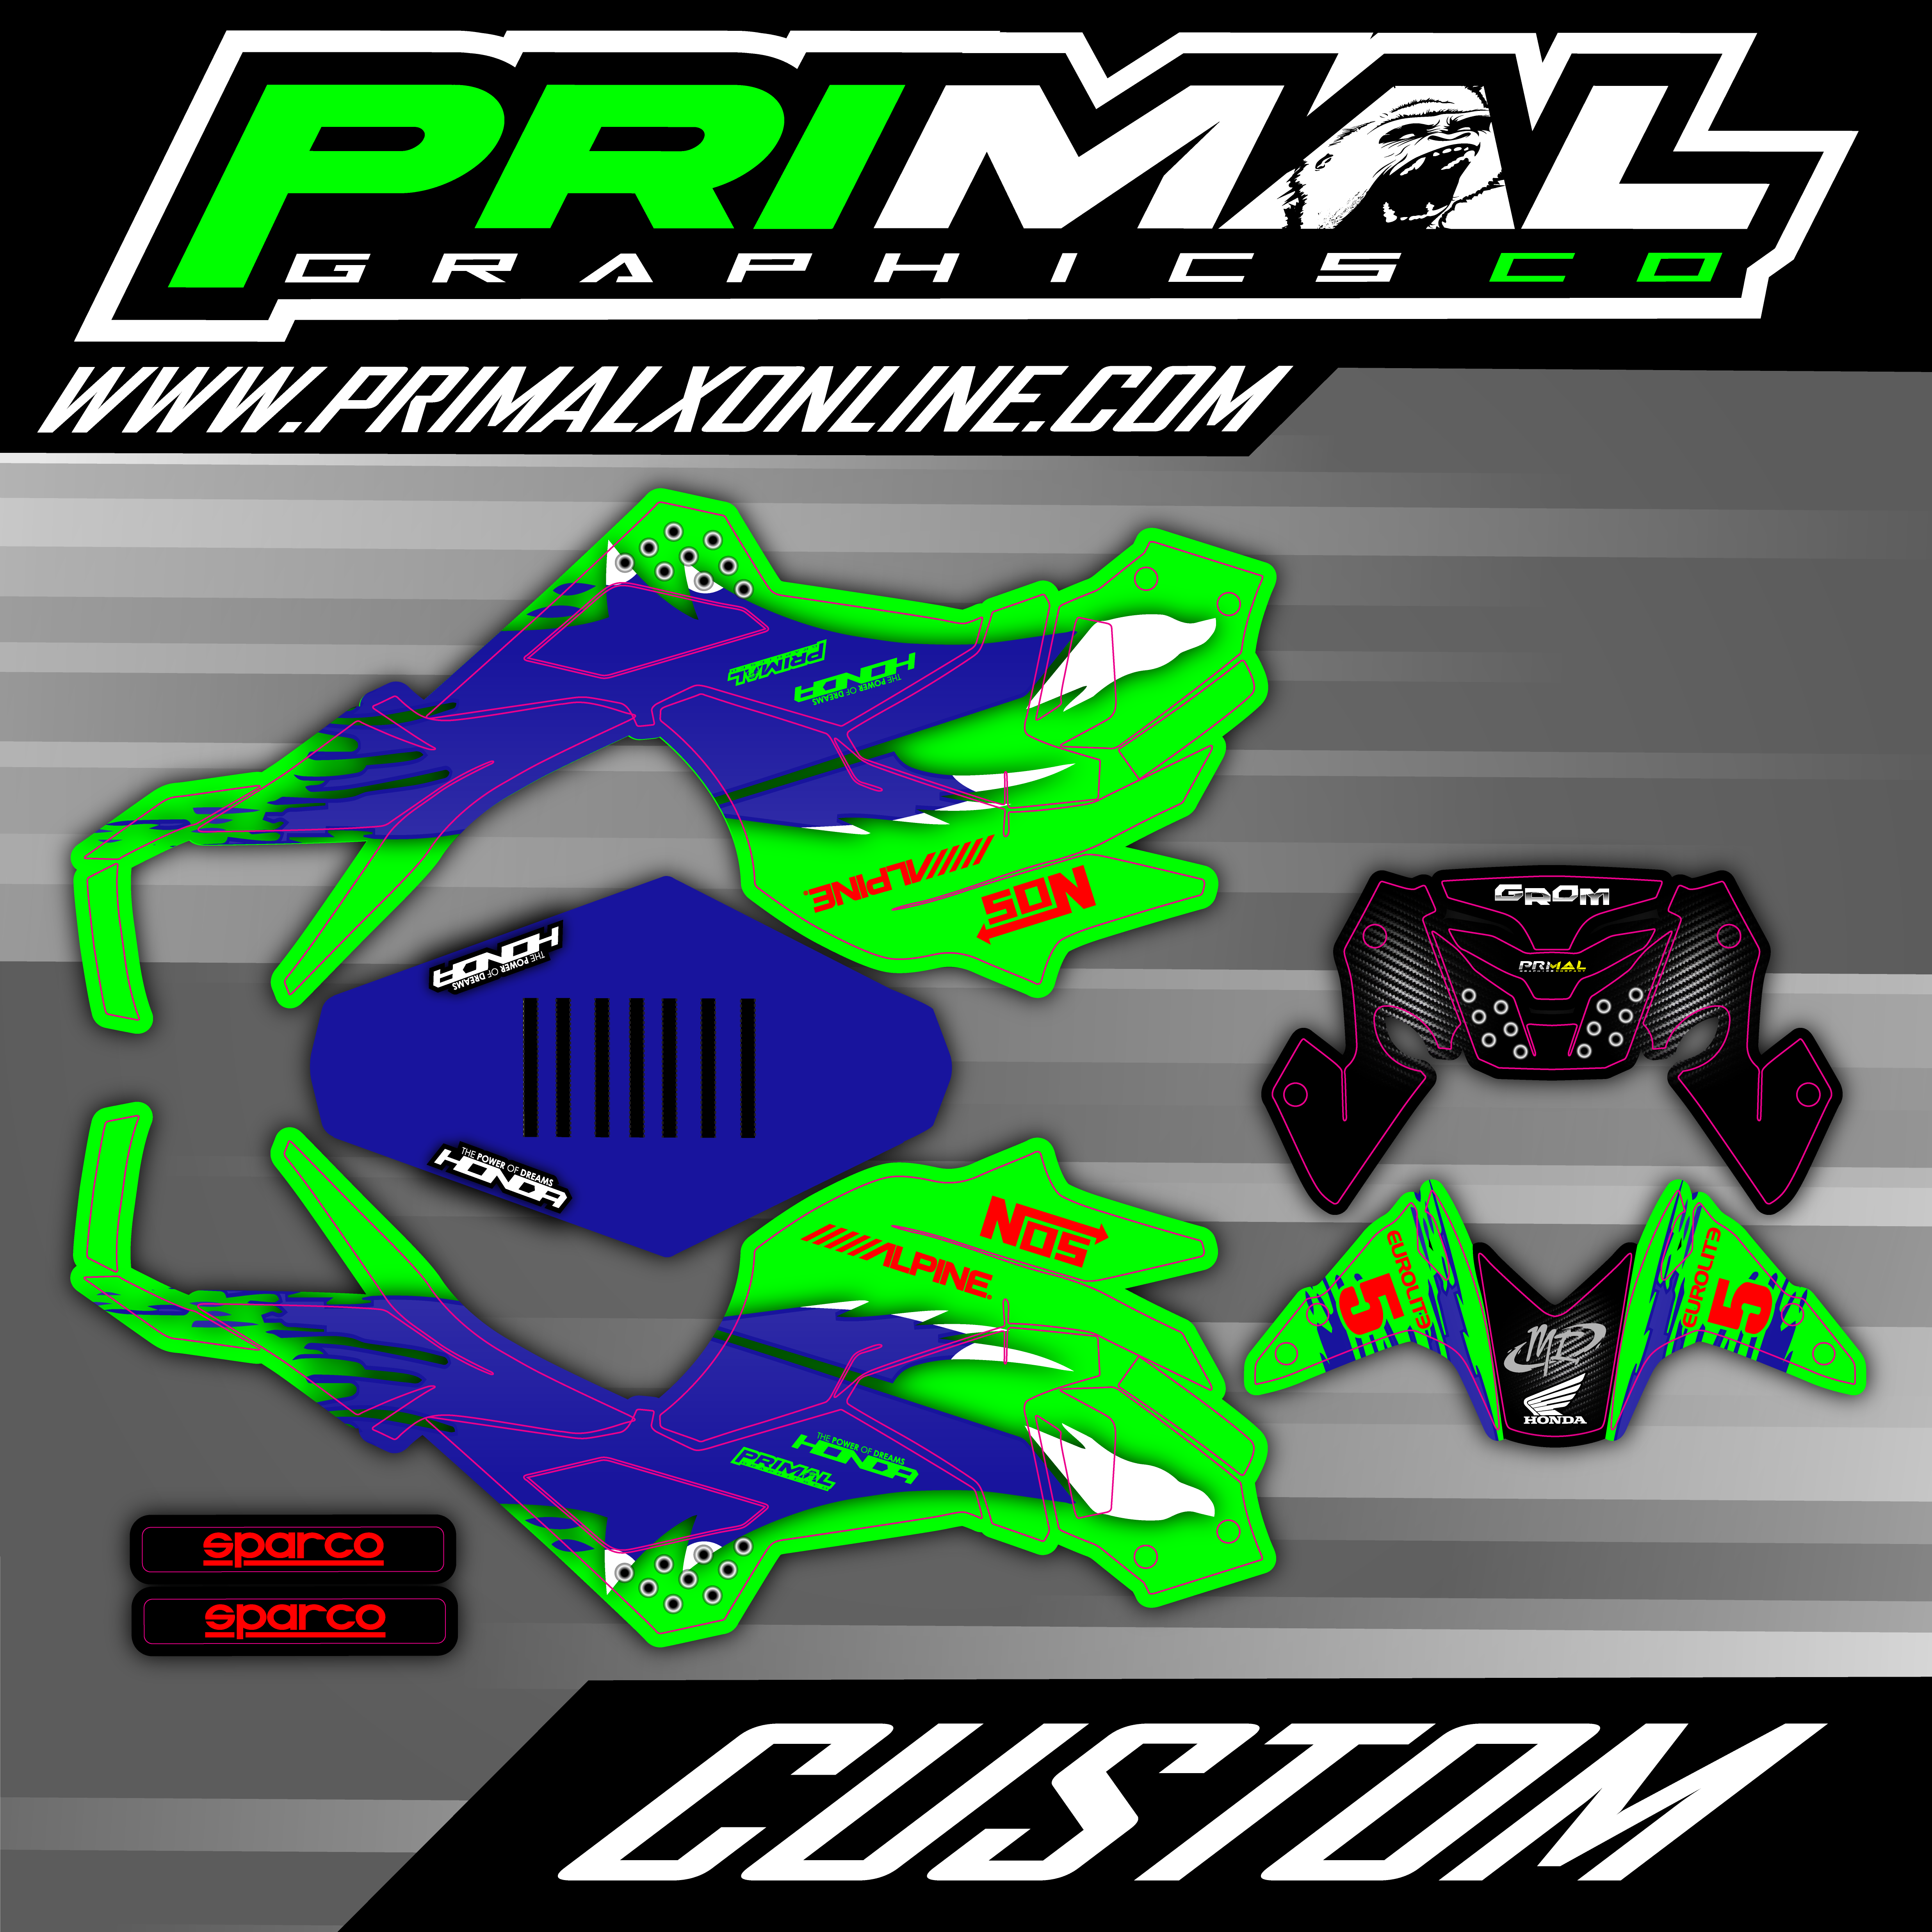 PRIMAL-GRAPHICS-CO-HONDA-GROM-FAST-AND-FURIOUS-ECLIPSE-01